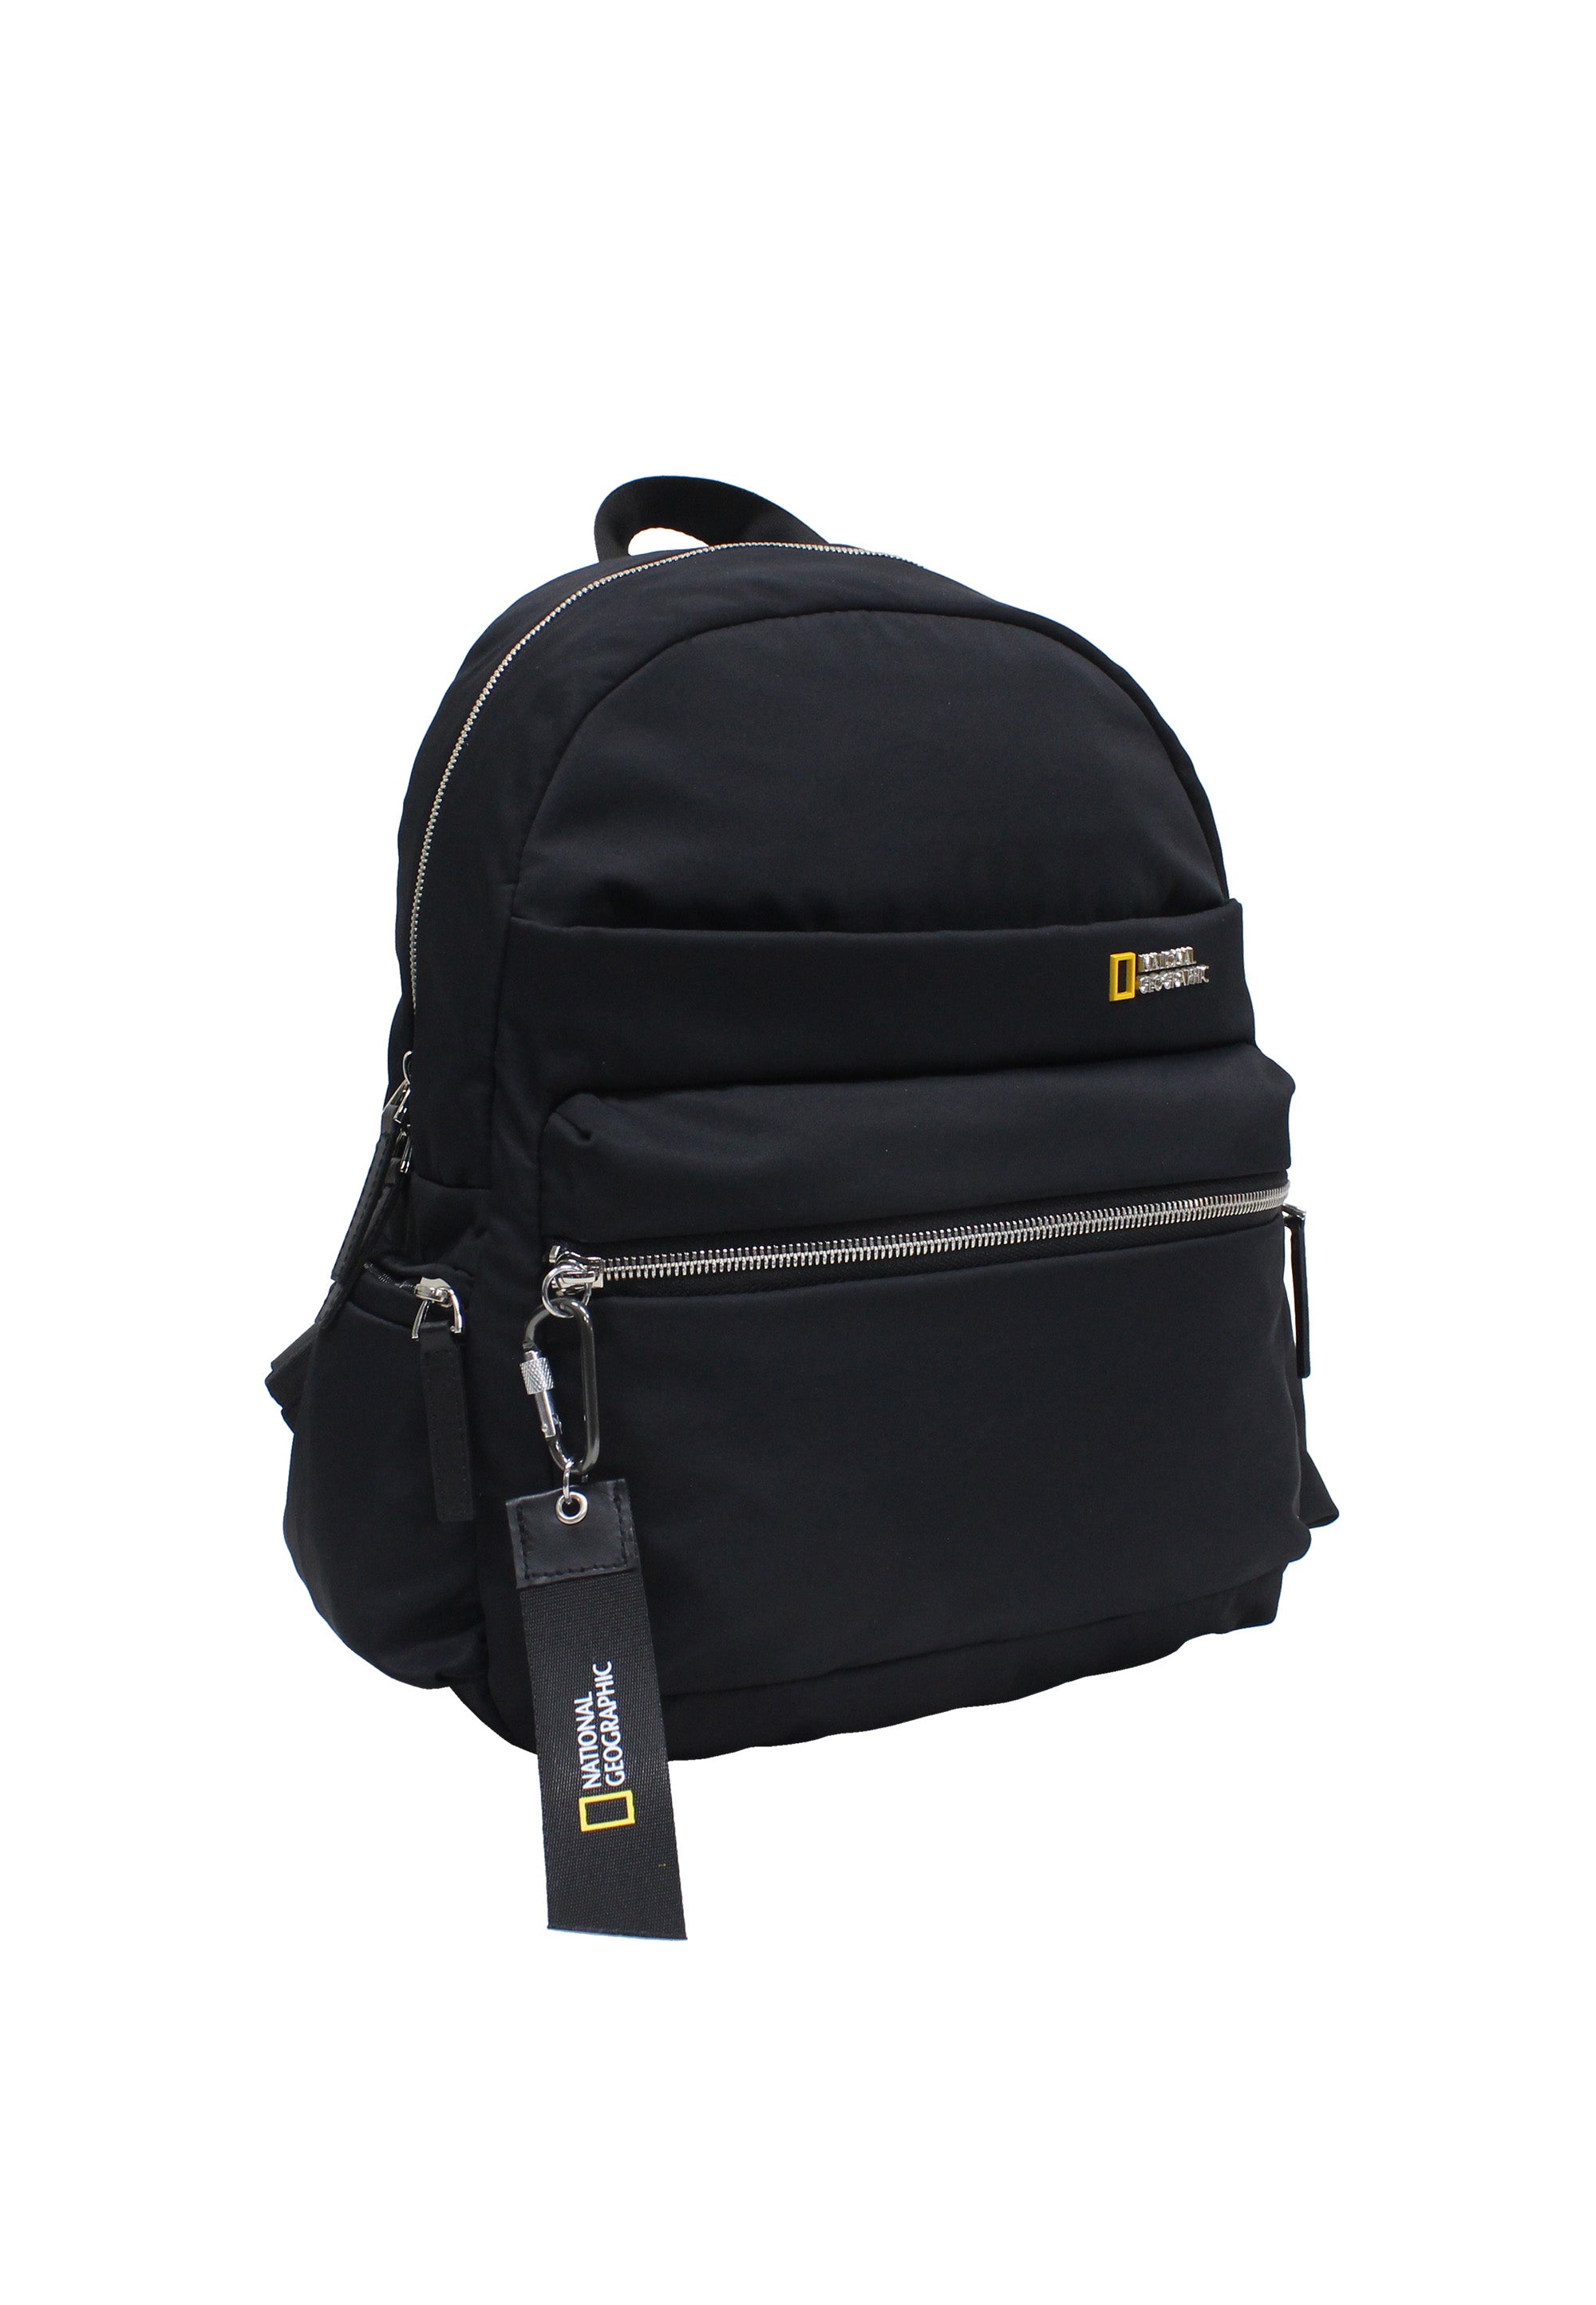 National Geographic - Research Rucksack - 10L